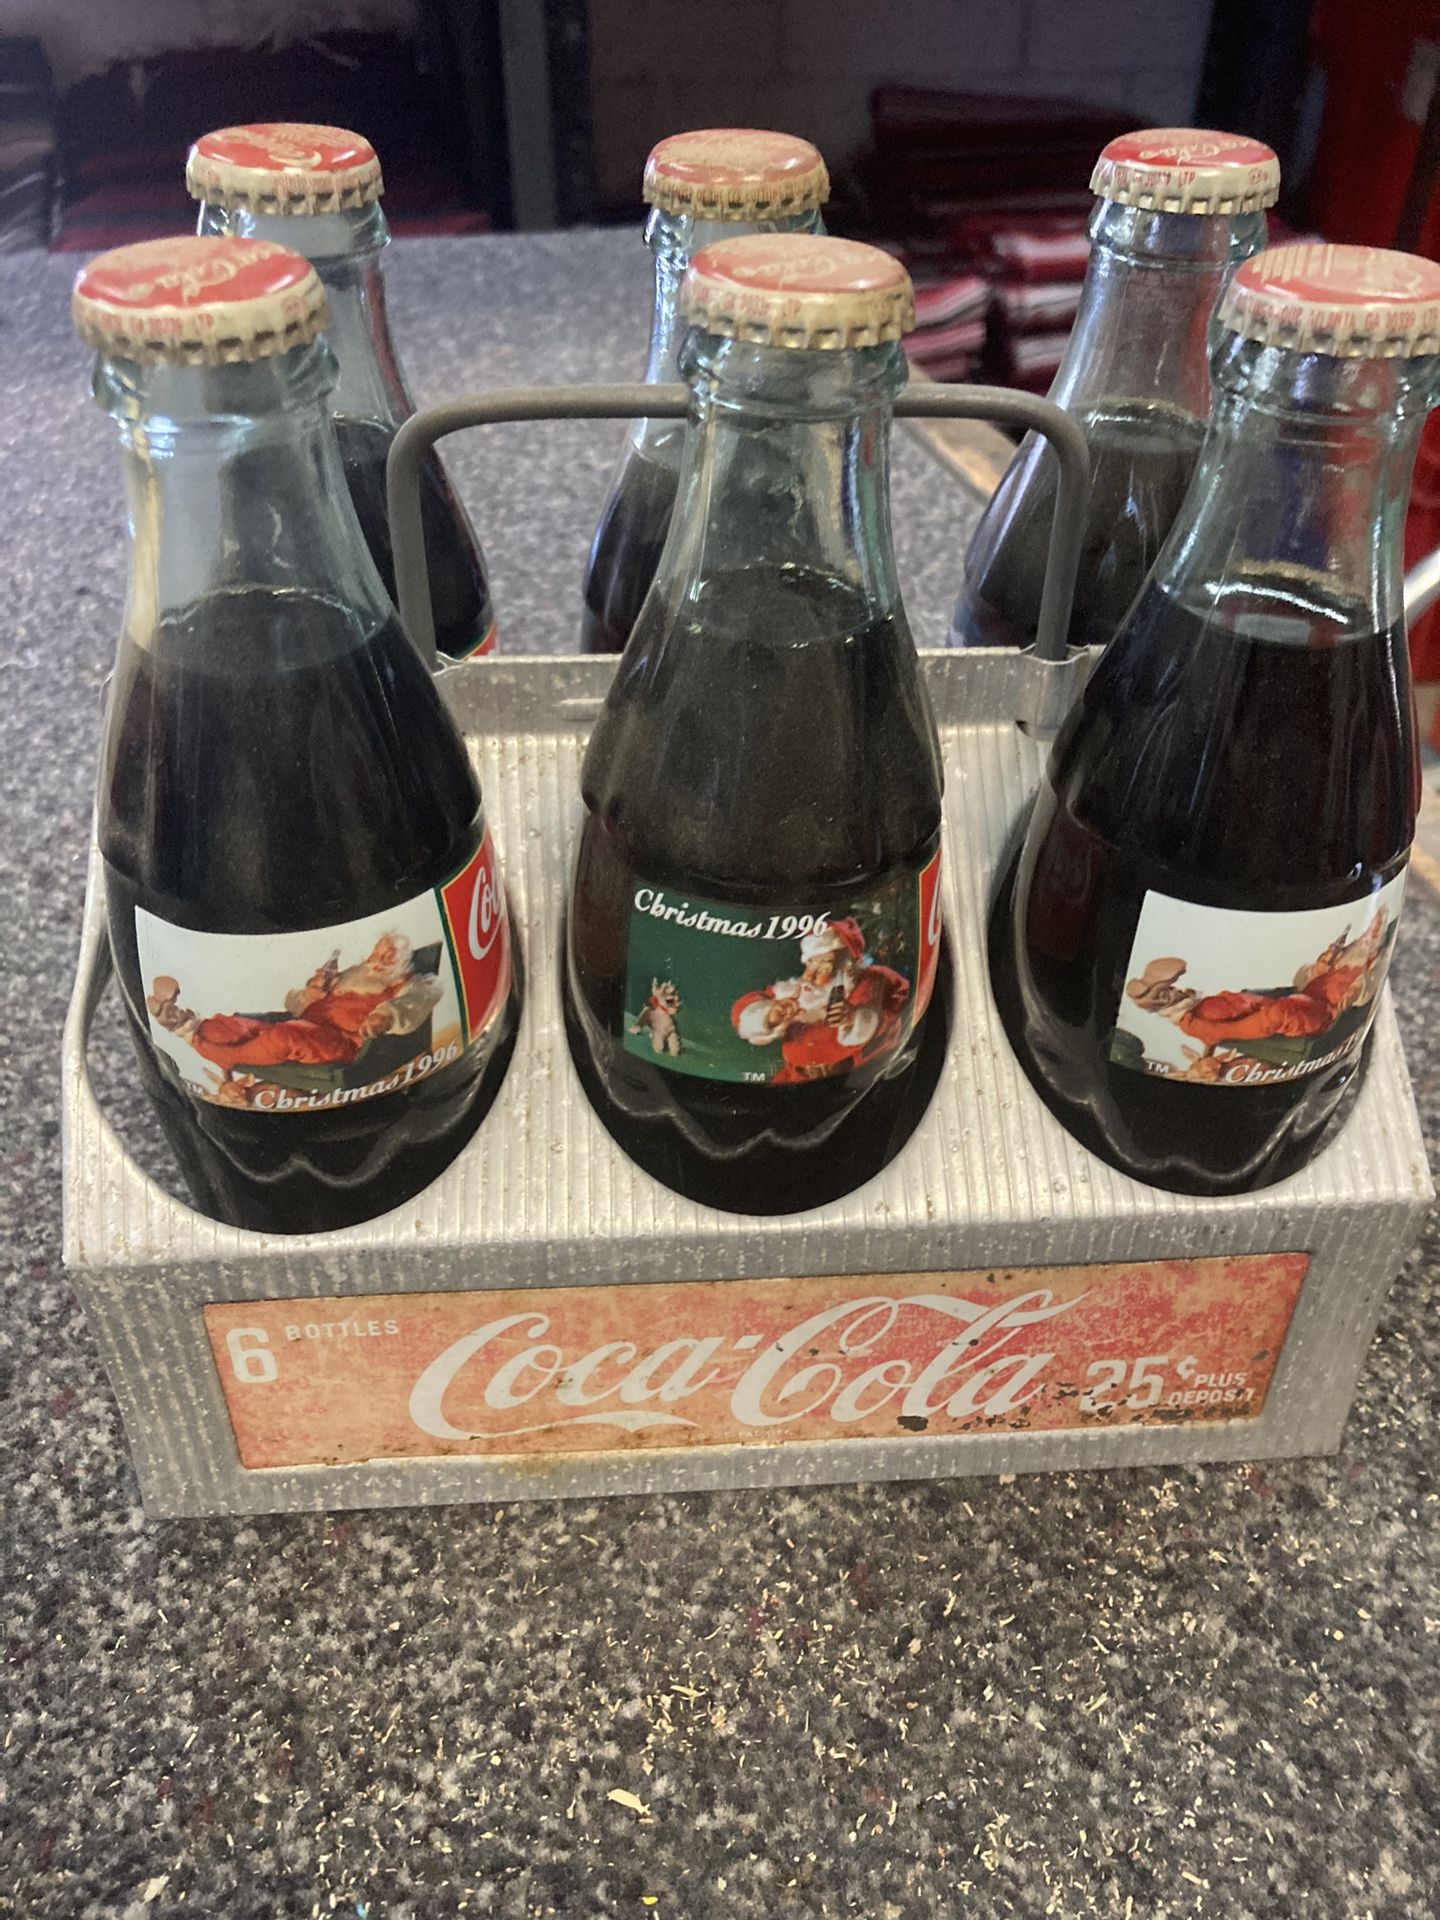 Coca-Cola. Collectible, Coke Bottles And A Caring Case